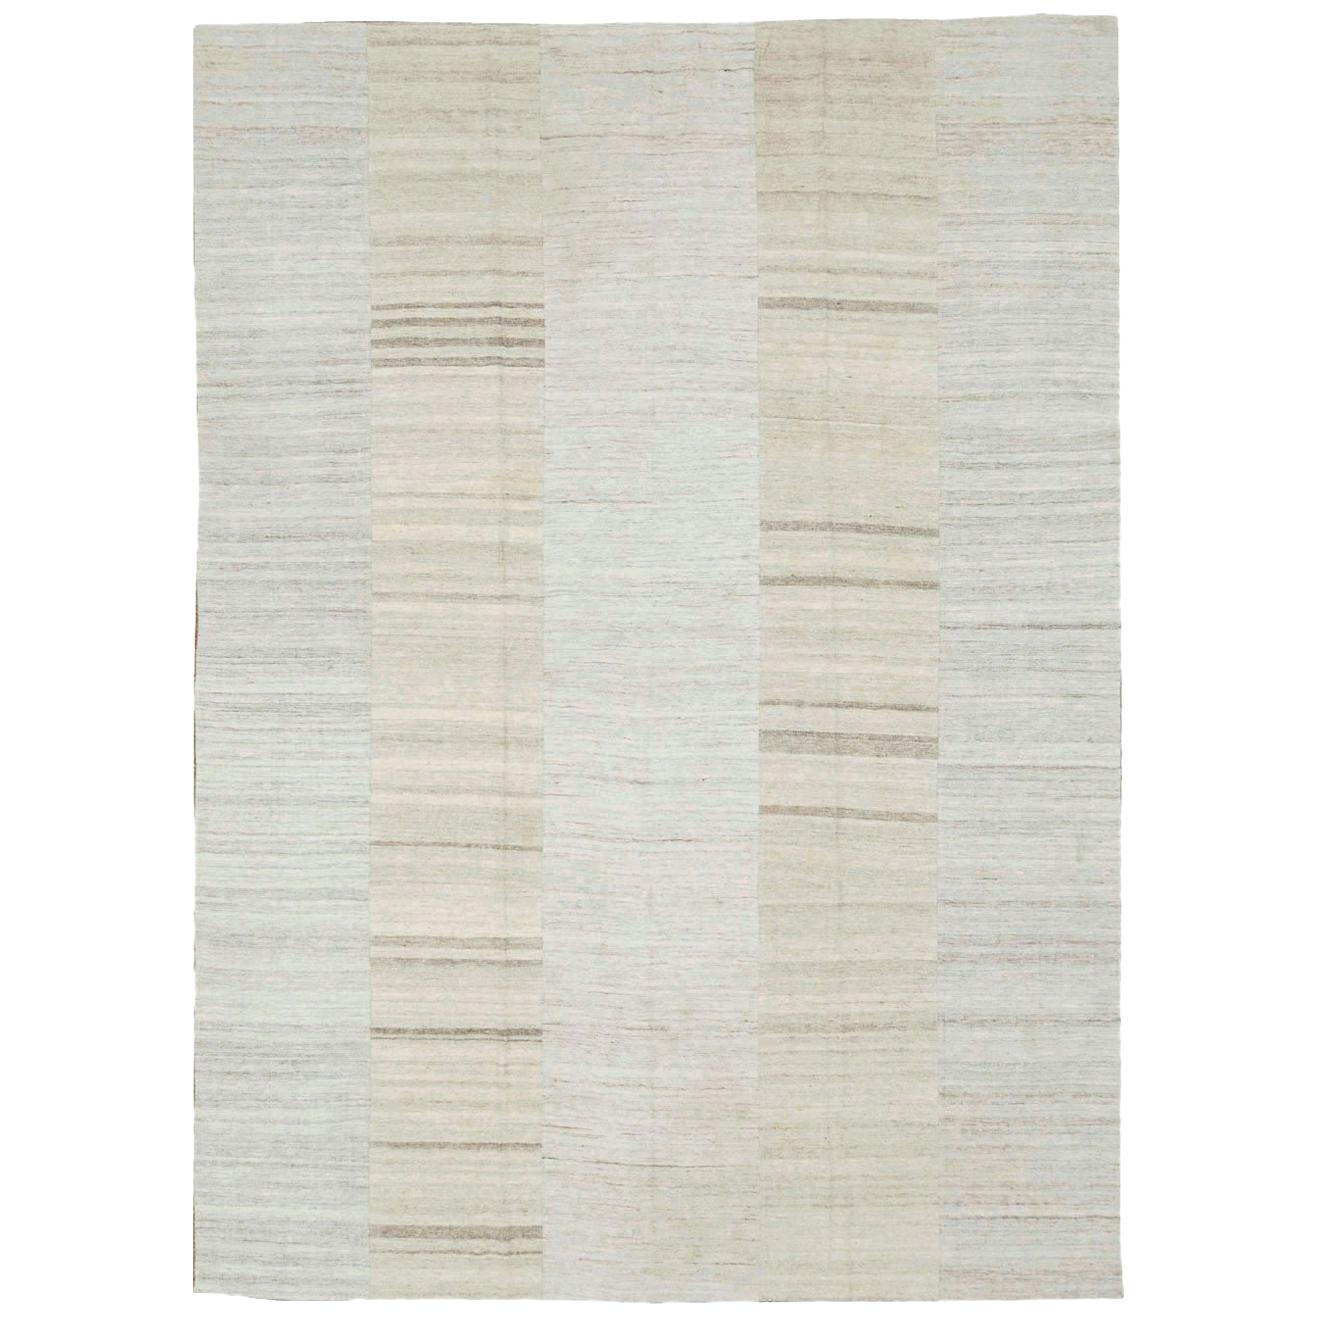 Contemporary Handmade Turkish Flatweave Kilim Room Size Carpet in Grey and Beige